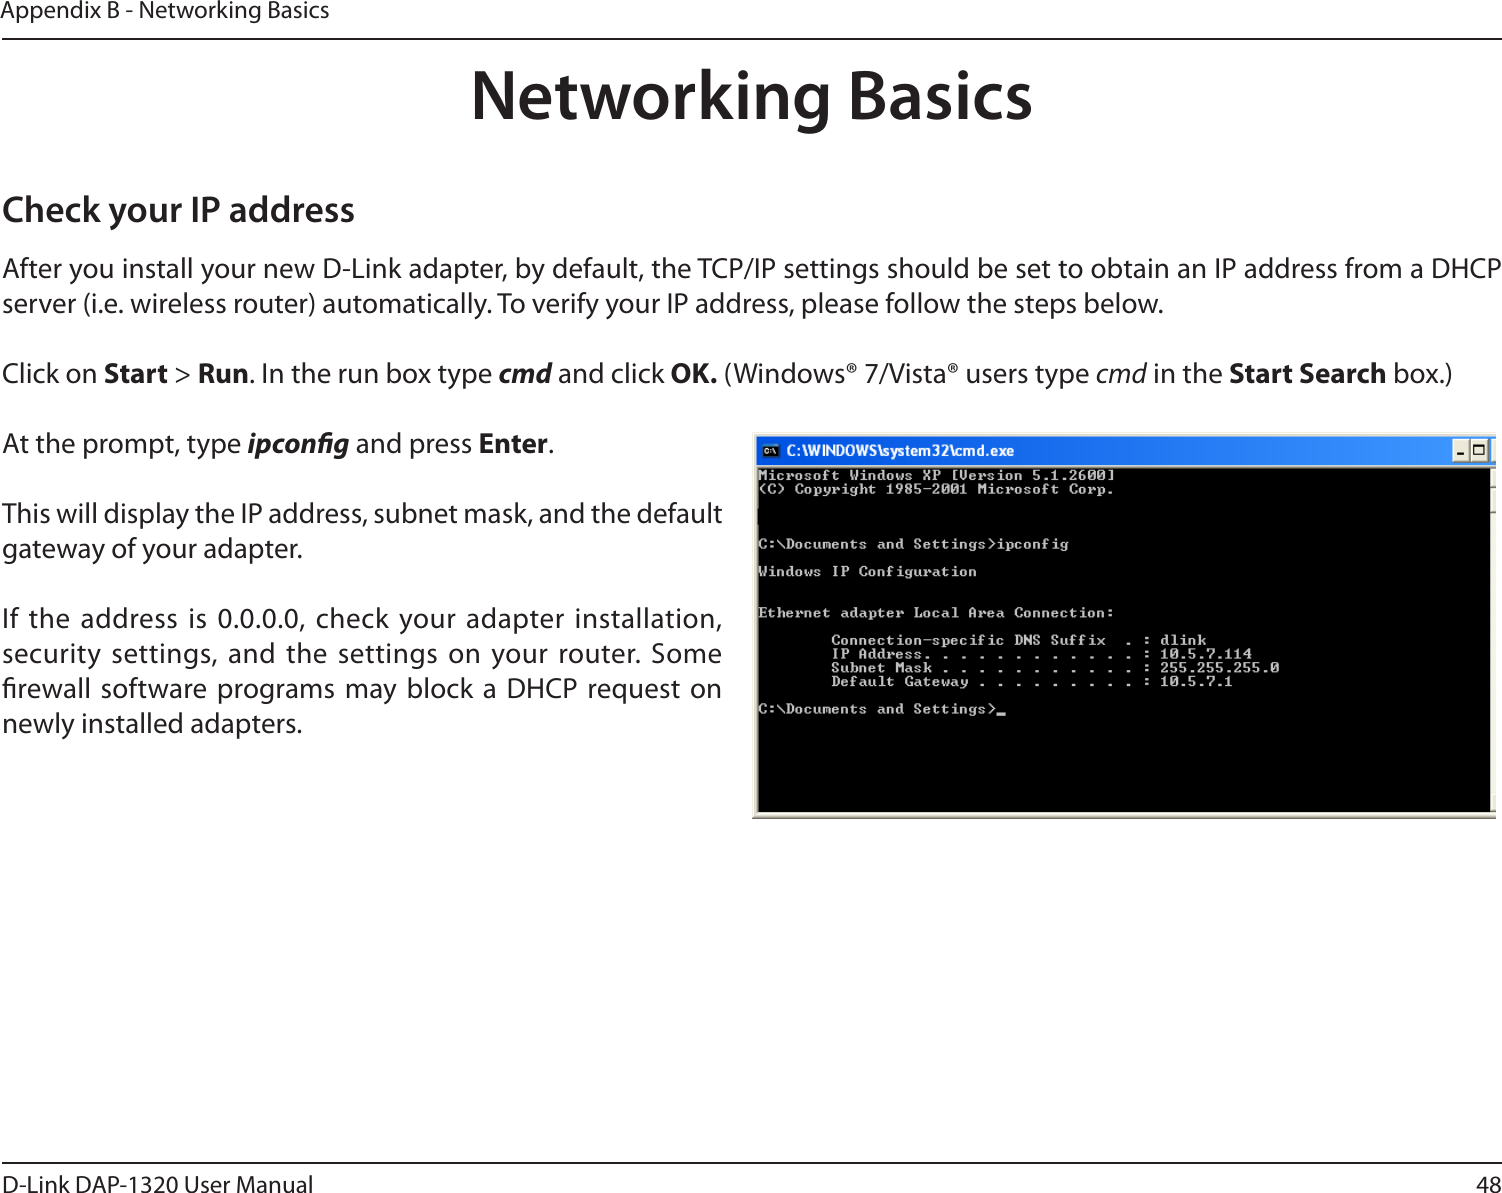 48D-Link DAP-1320 User ManualAppendix B - Networking BasicsNetworking BasicsCheck your IP addressAfter you install your new D-Link adapter, by default, the TCP/IP settings should be set to obtain an IP address from a DHCP server (i.e. wireless router) automatically. To verify your IP address, please follow the steps below.Click on Start &gt; Run. In the run box type cmd and click OK. (Windows® 7/Vista® users type cmd in the Start Search box.)At the prompt, type ipcong and press Enter.This will display the IP address, subnet mask, and the default gateway of your adapter.If the  address is 0.0.0.0, check your adapter installation, security  settings, and  the settings  on your router. Some rewall software programs may block  a DHCP request on newly installed adapters. 